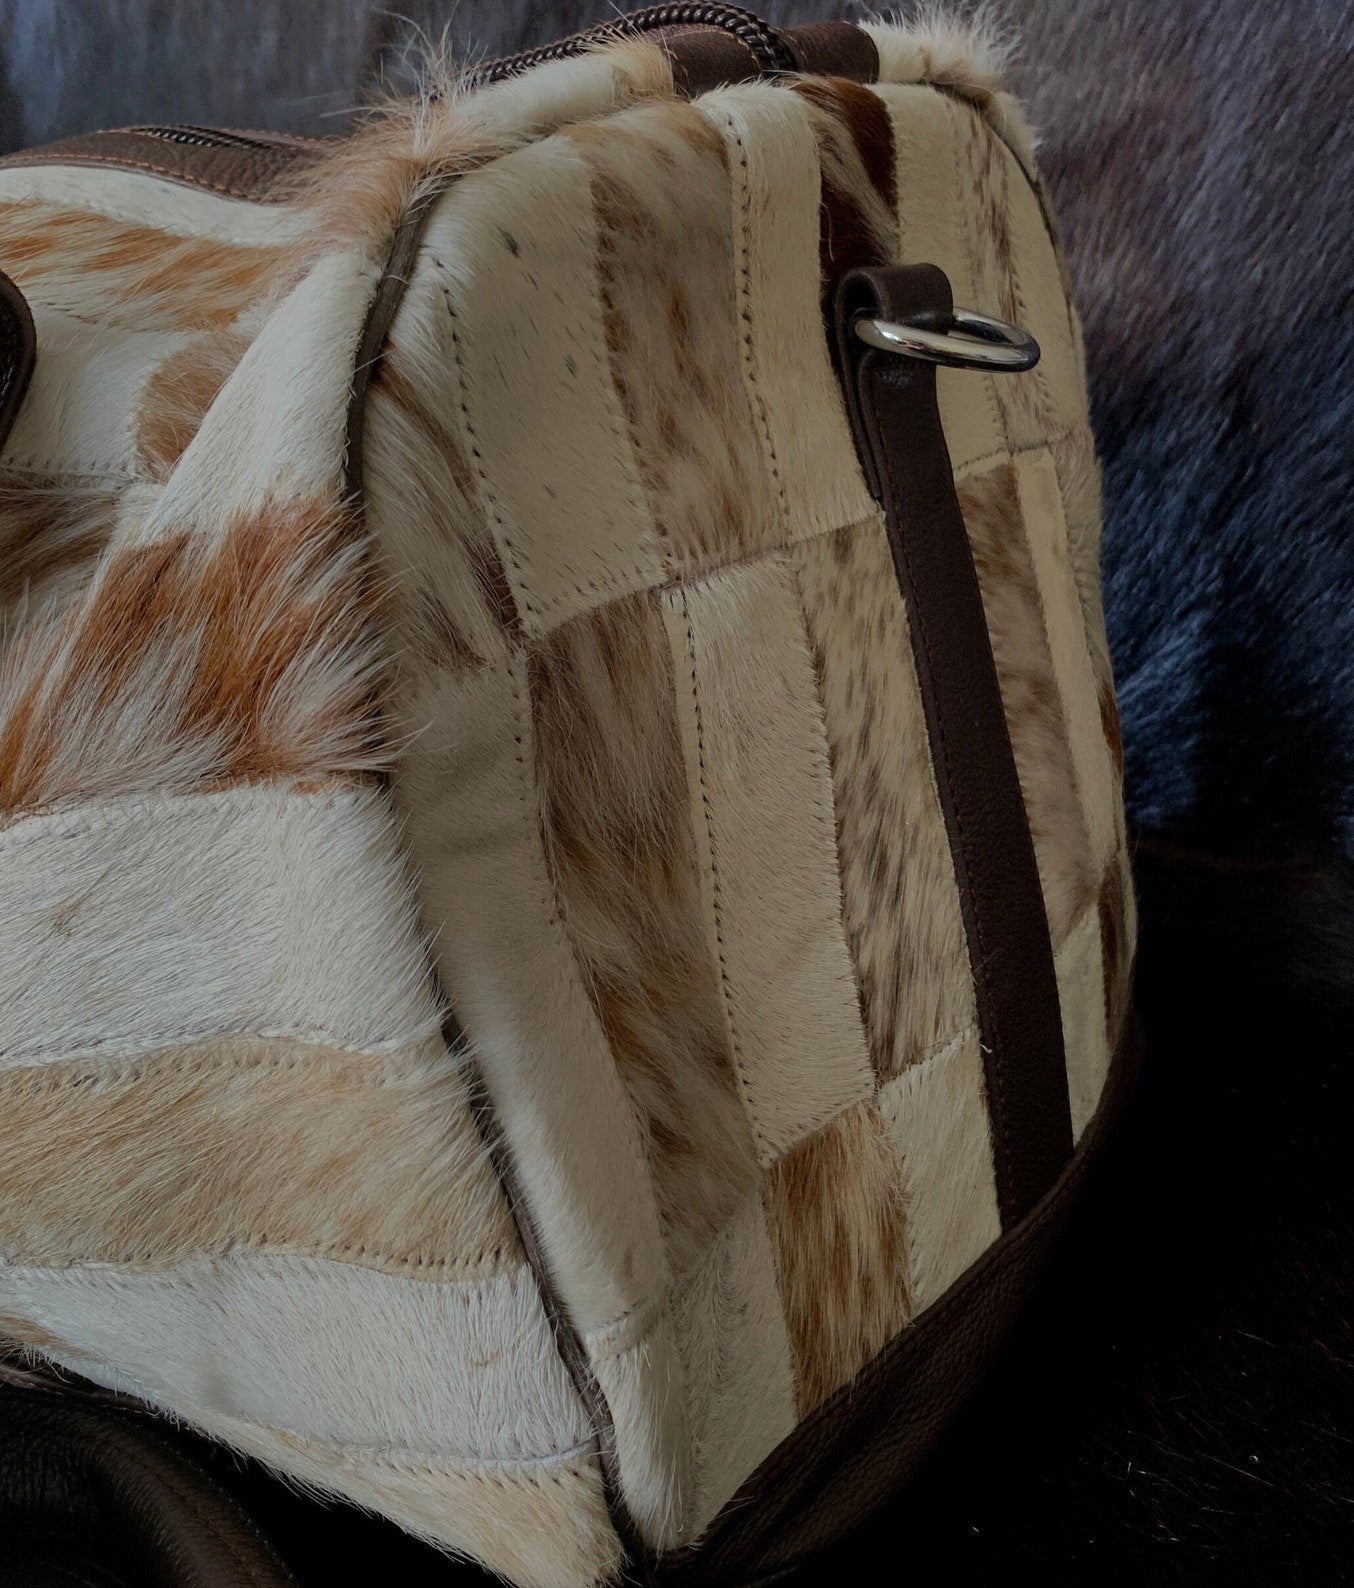 Travel with flair using this cowhide travel bag, a perfect blend of durability, style, and functionality for the modern voyager.